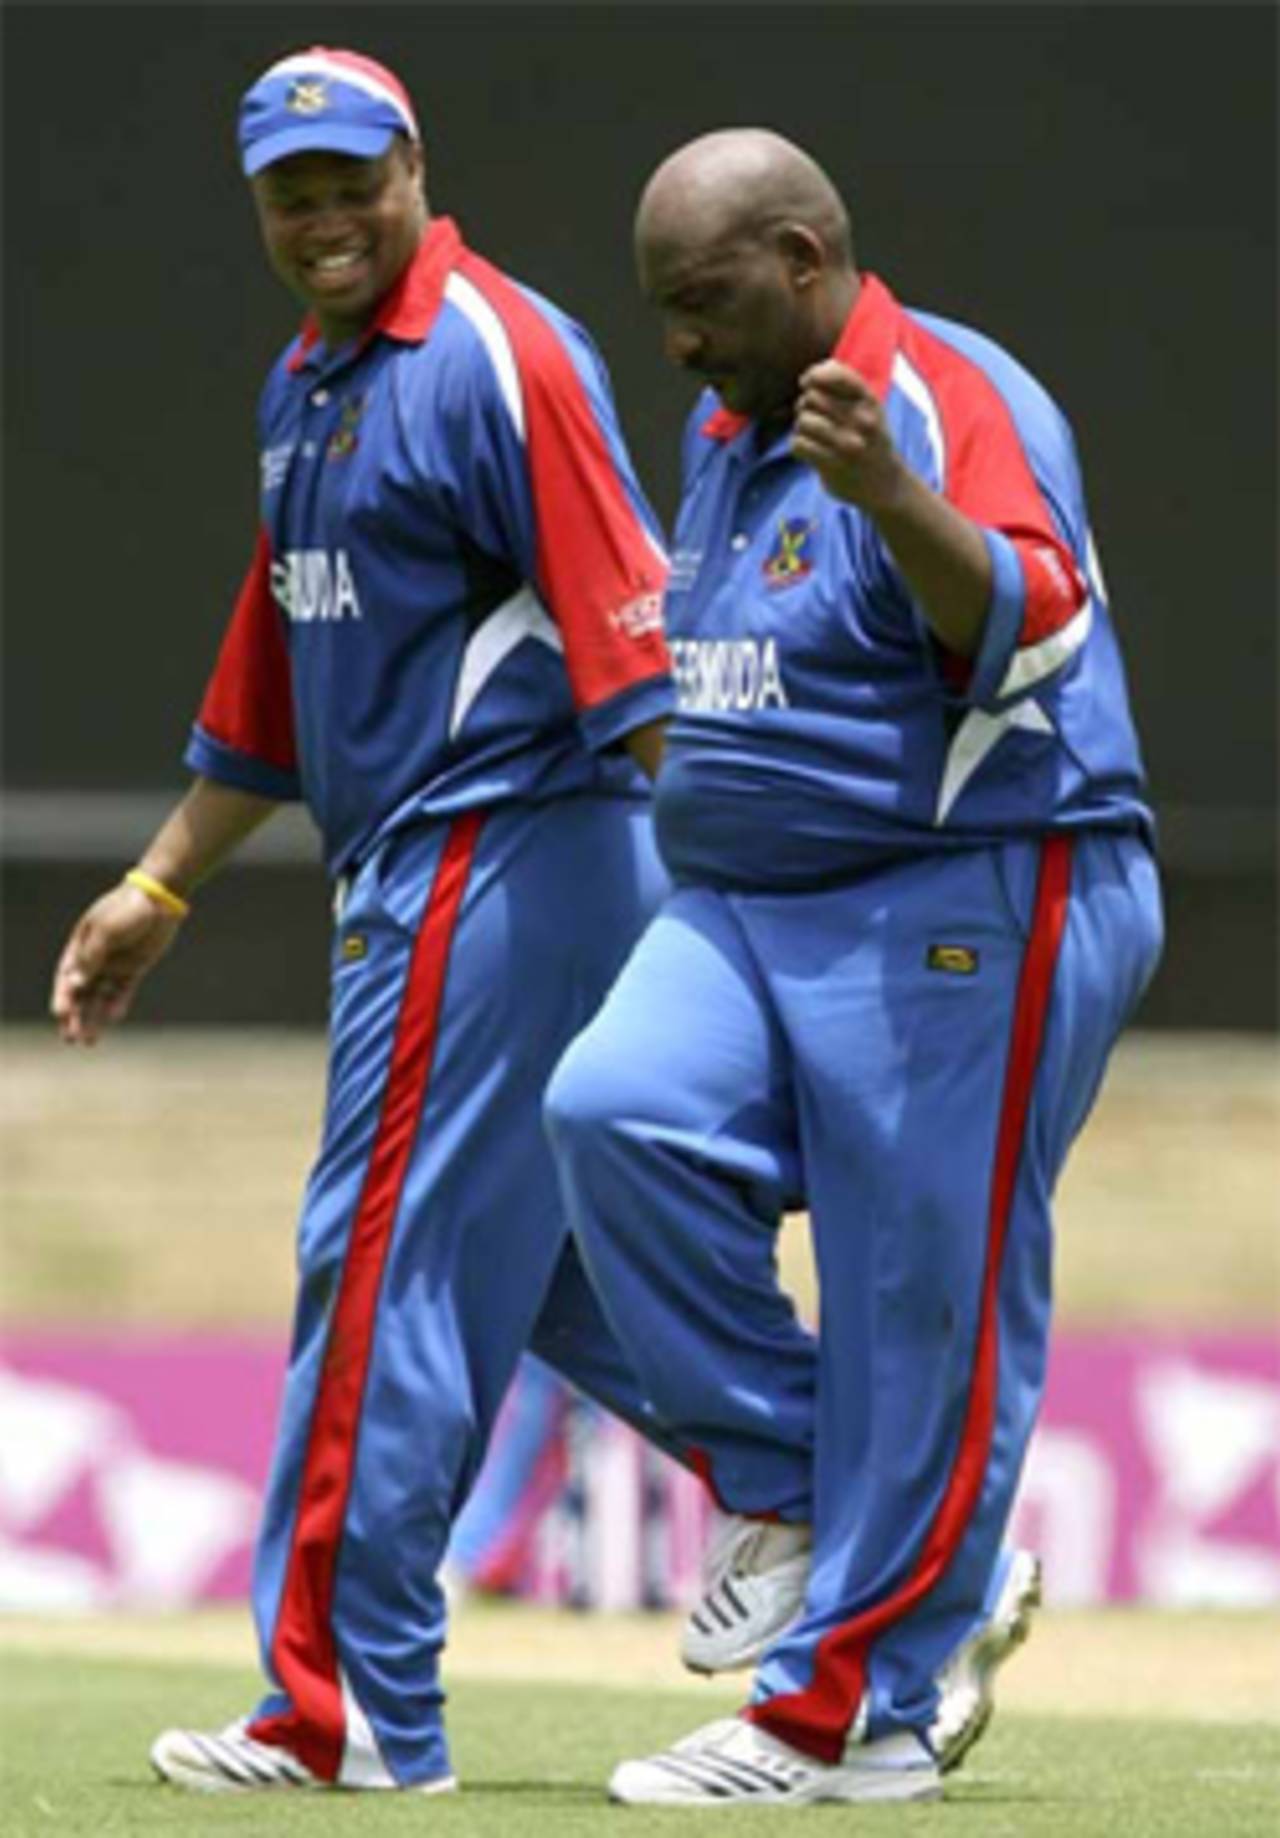 Dwayne Leverock, Bermuda's most colourful character, does a jig after picking up the wicket of Kumar Sangakkara during the 2007 World Cup&nbsp;&nbsp;&bull;&nbsp;&nbsp;Getty Images